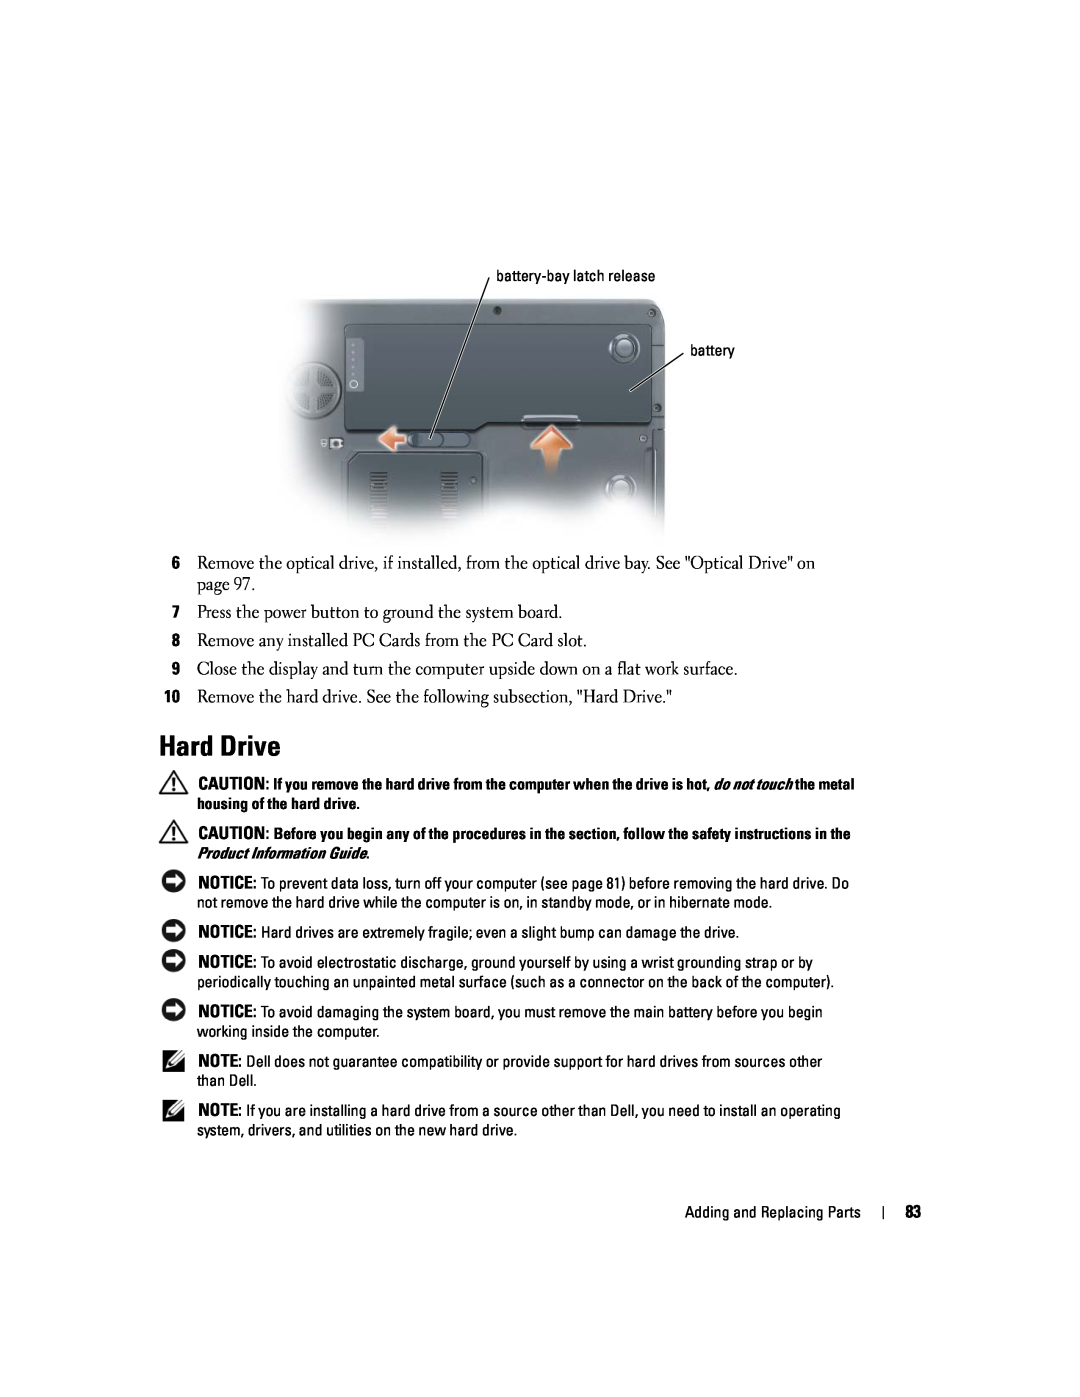 Dell 9300 owner manual Hard Drive, Press the power button to ground the system board 